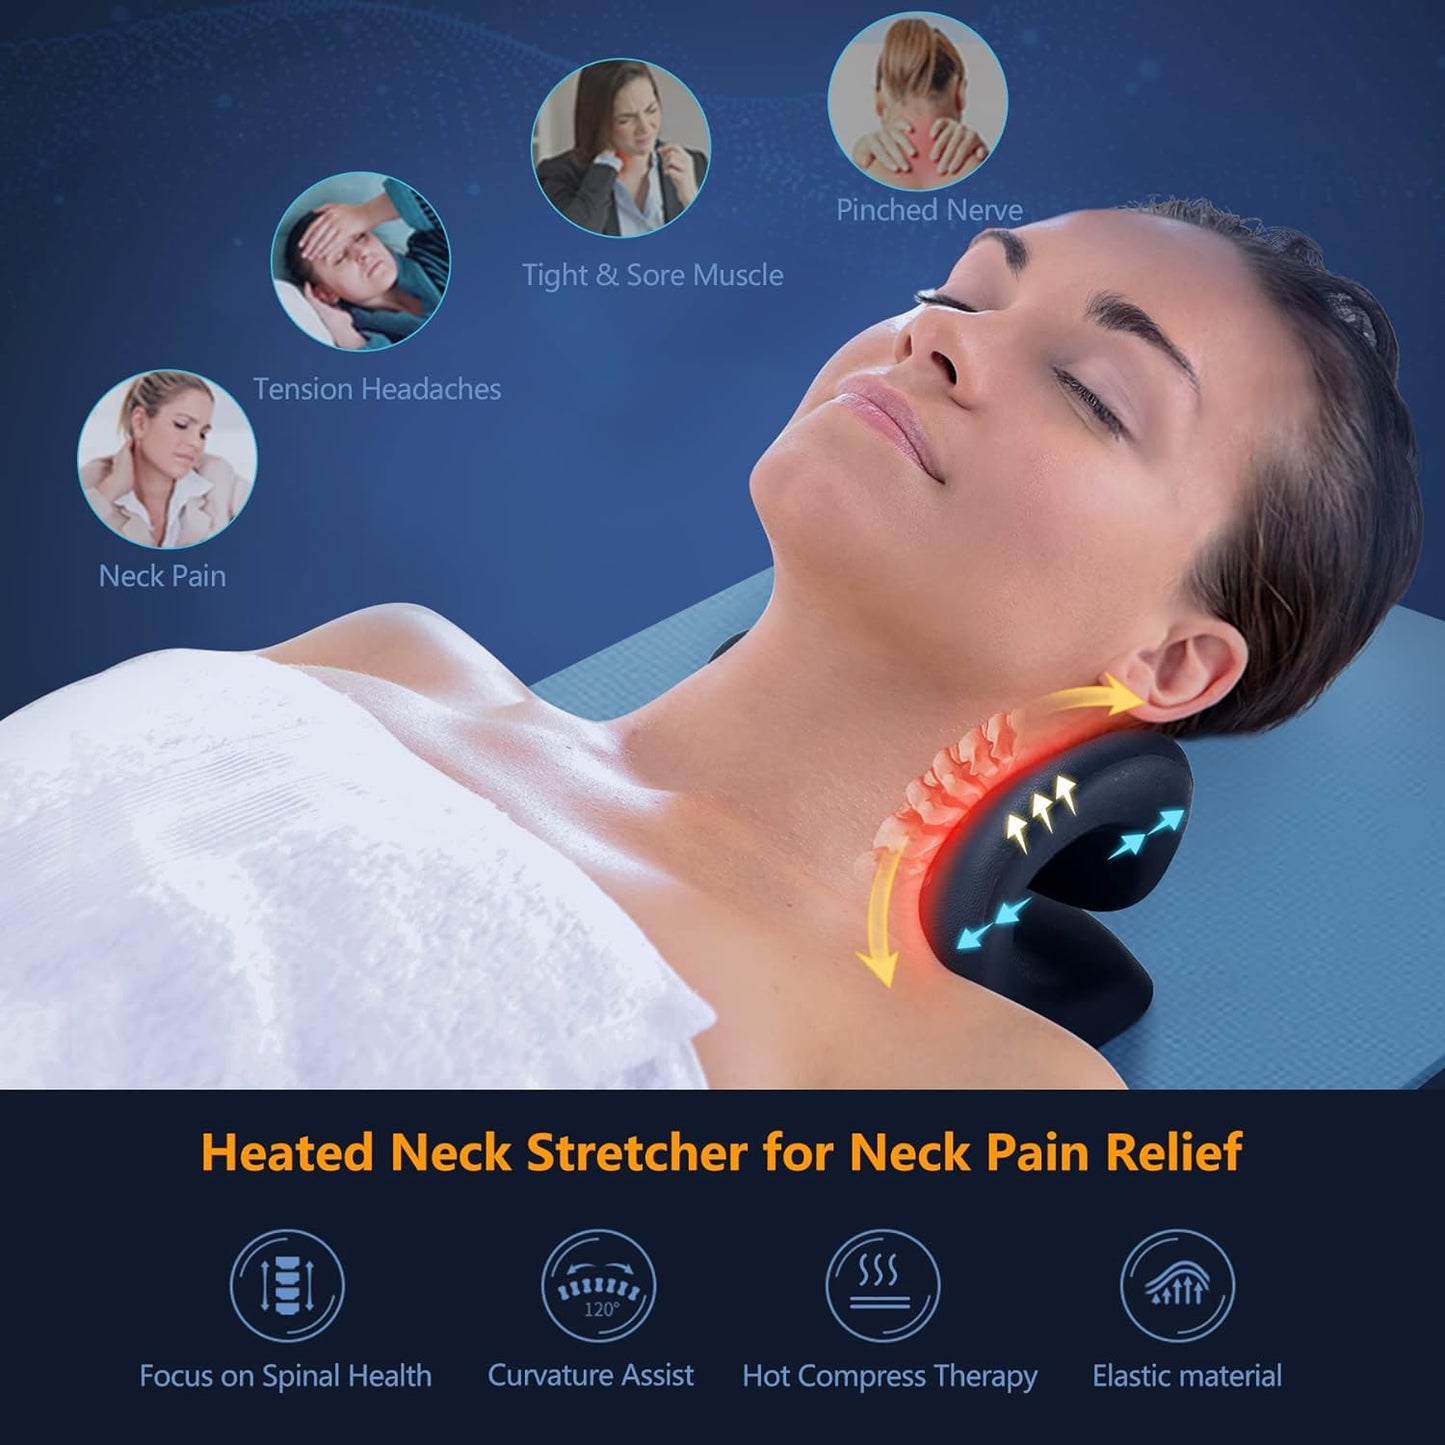 Neck Pain Relief and Relaxation